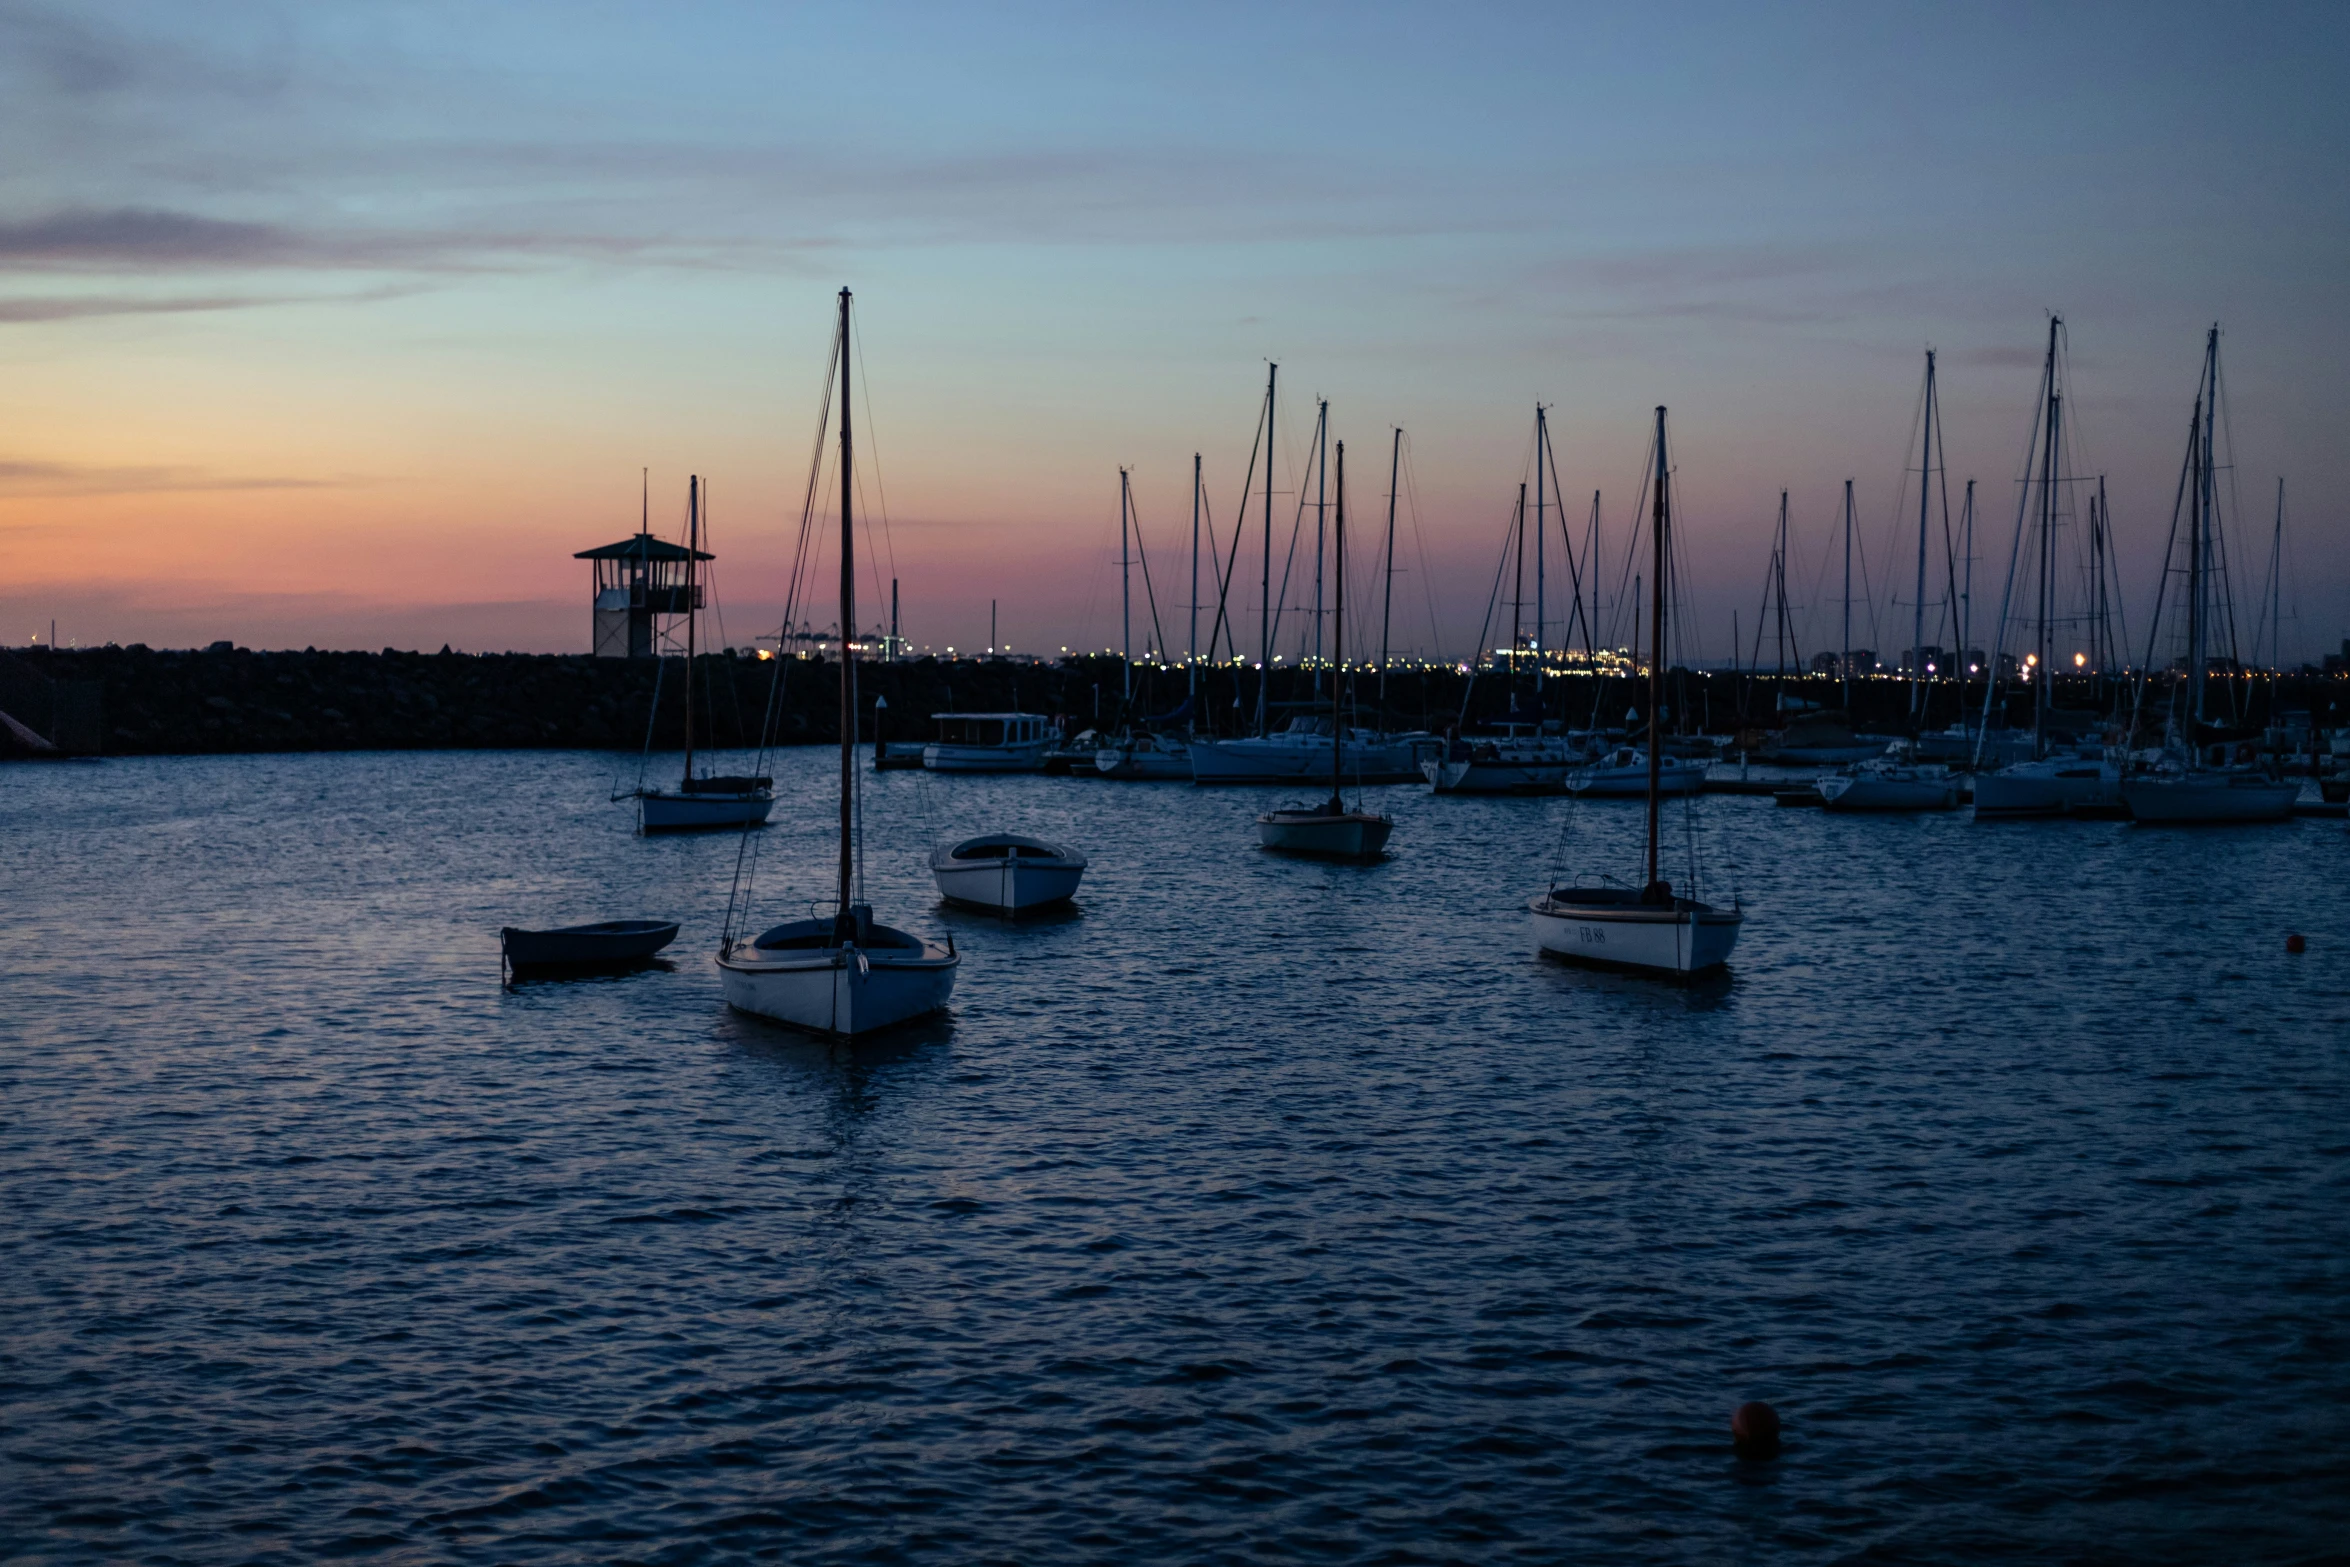 a sunset in a harbor of several boats